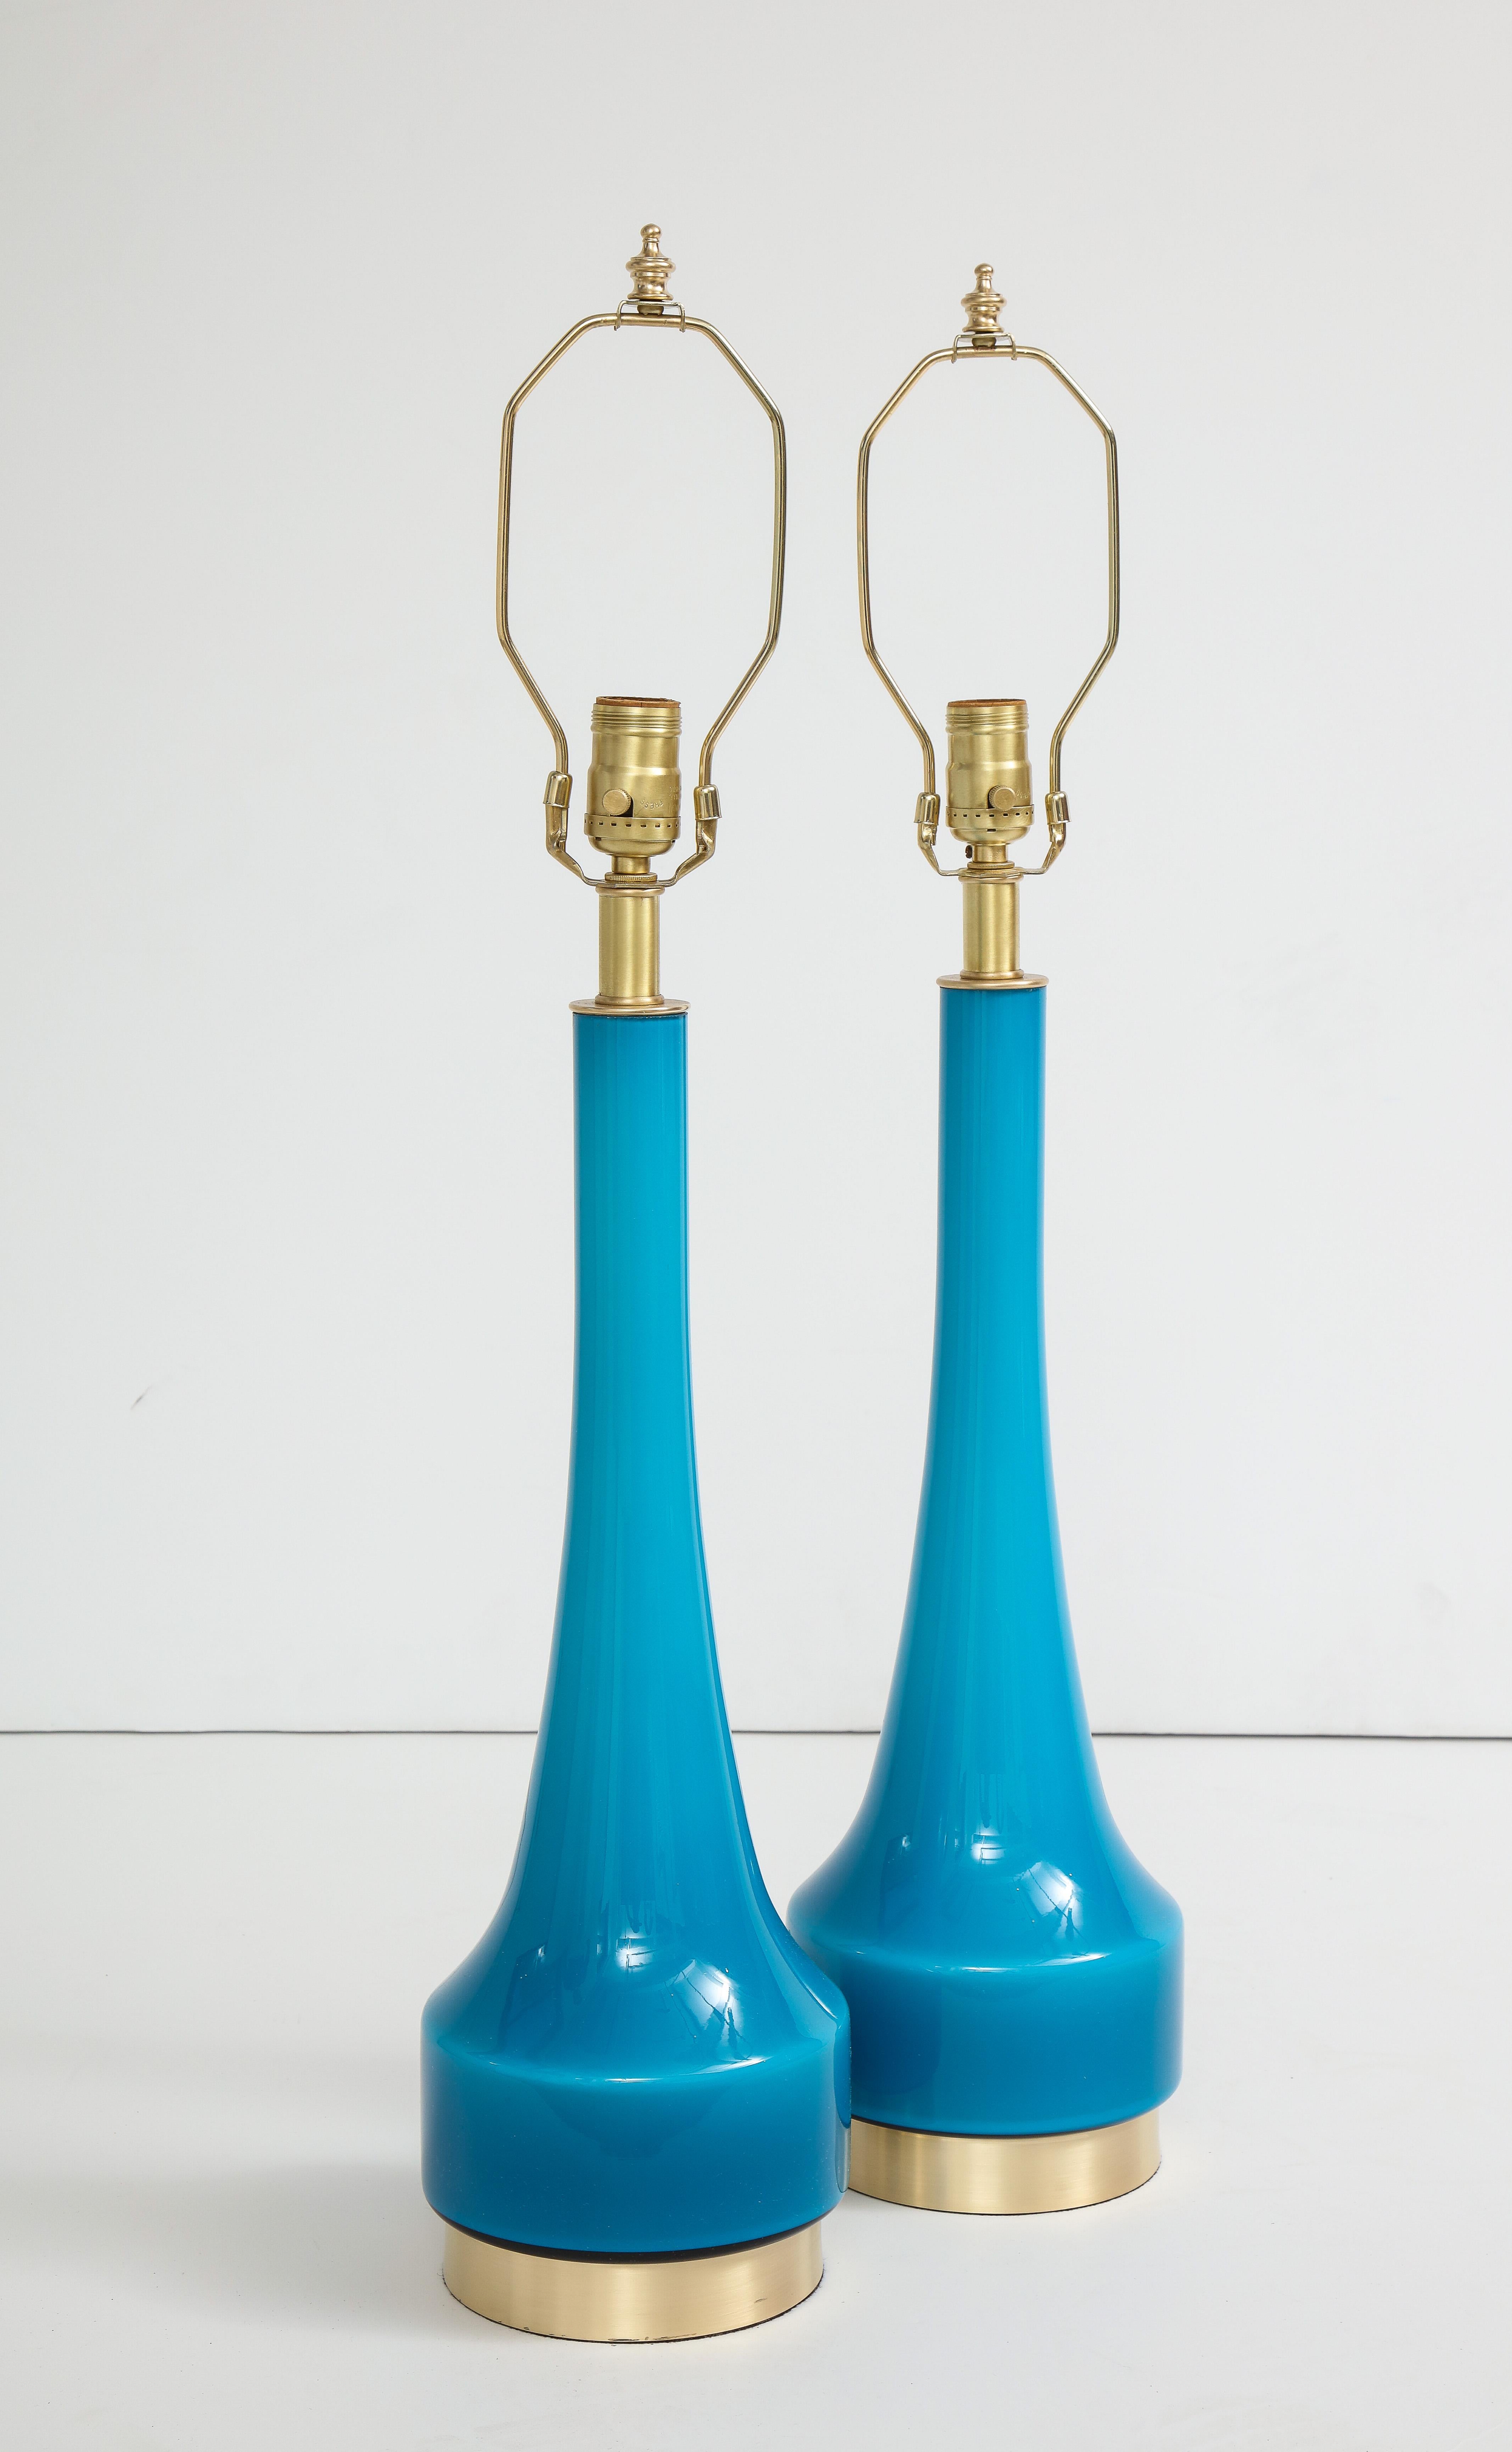 Pair of deep cerulean blue hand blown glass lamps on satin brass bases by Holmegaard. Rewired for use in the USA, 100W max.